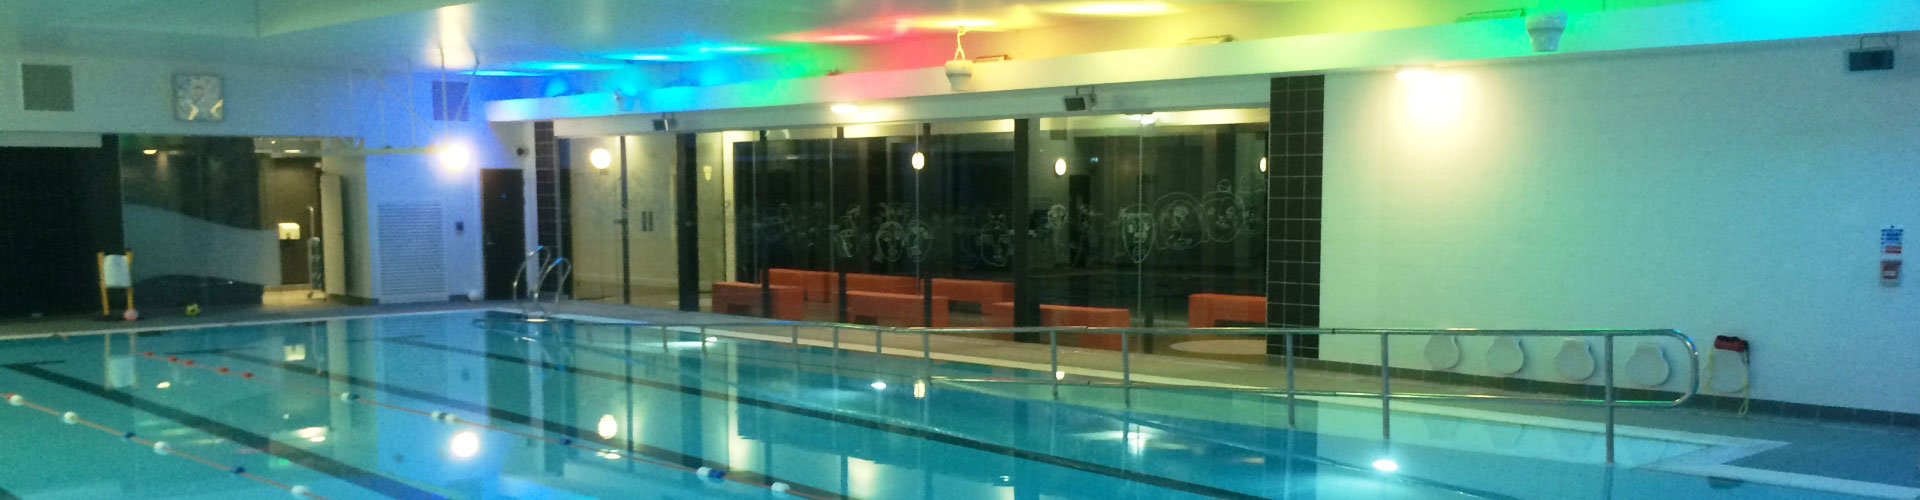 Airius Destratification Fan Installations in Sports and Leisure Buildings - Banner 5